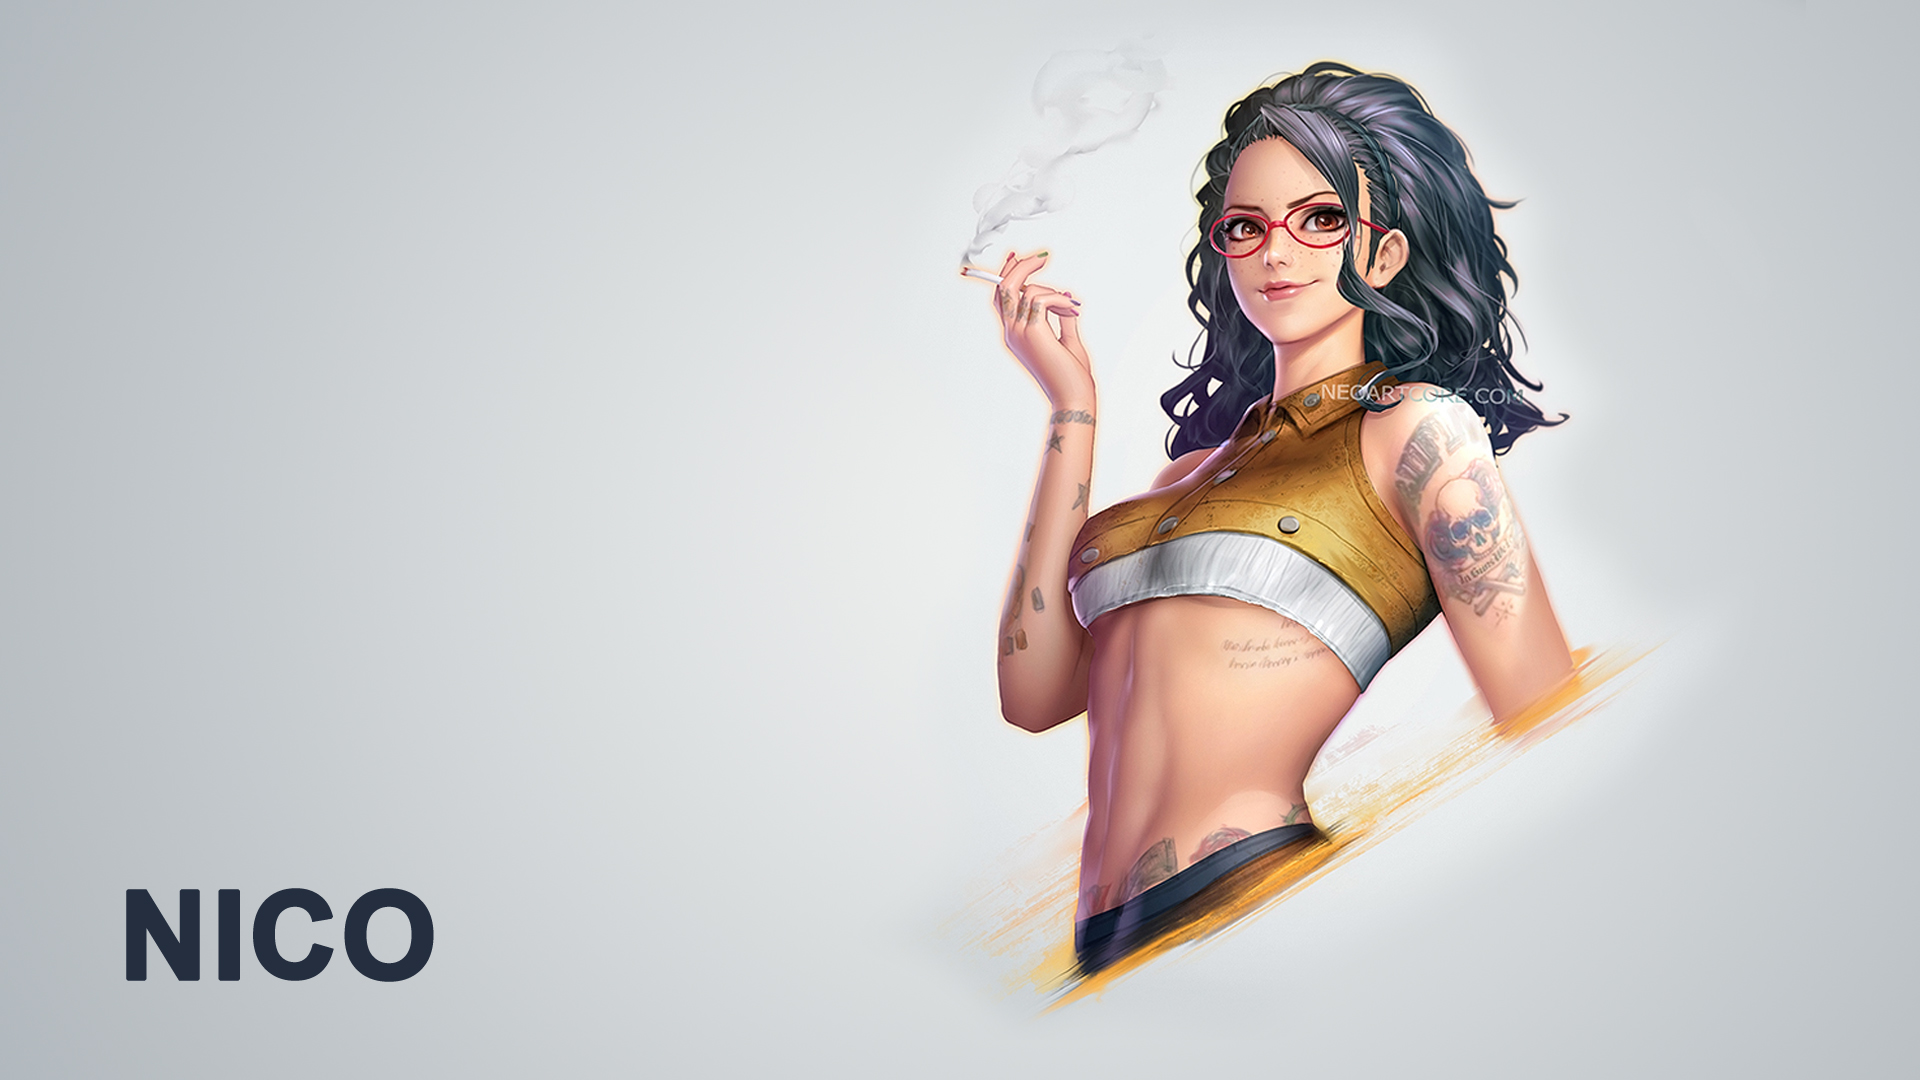 Nico Devil May Cry Devil May Cry 5 Cigarettes Women 1920x1080